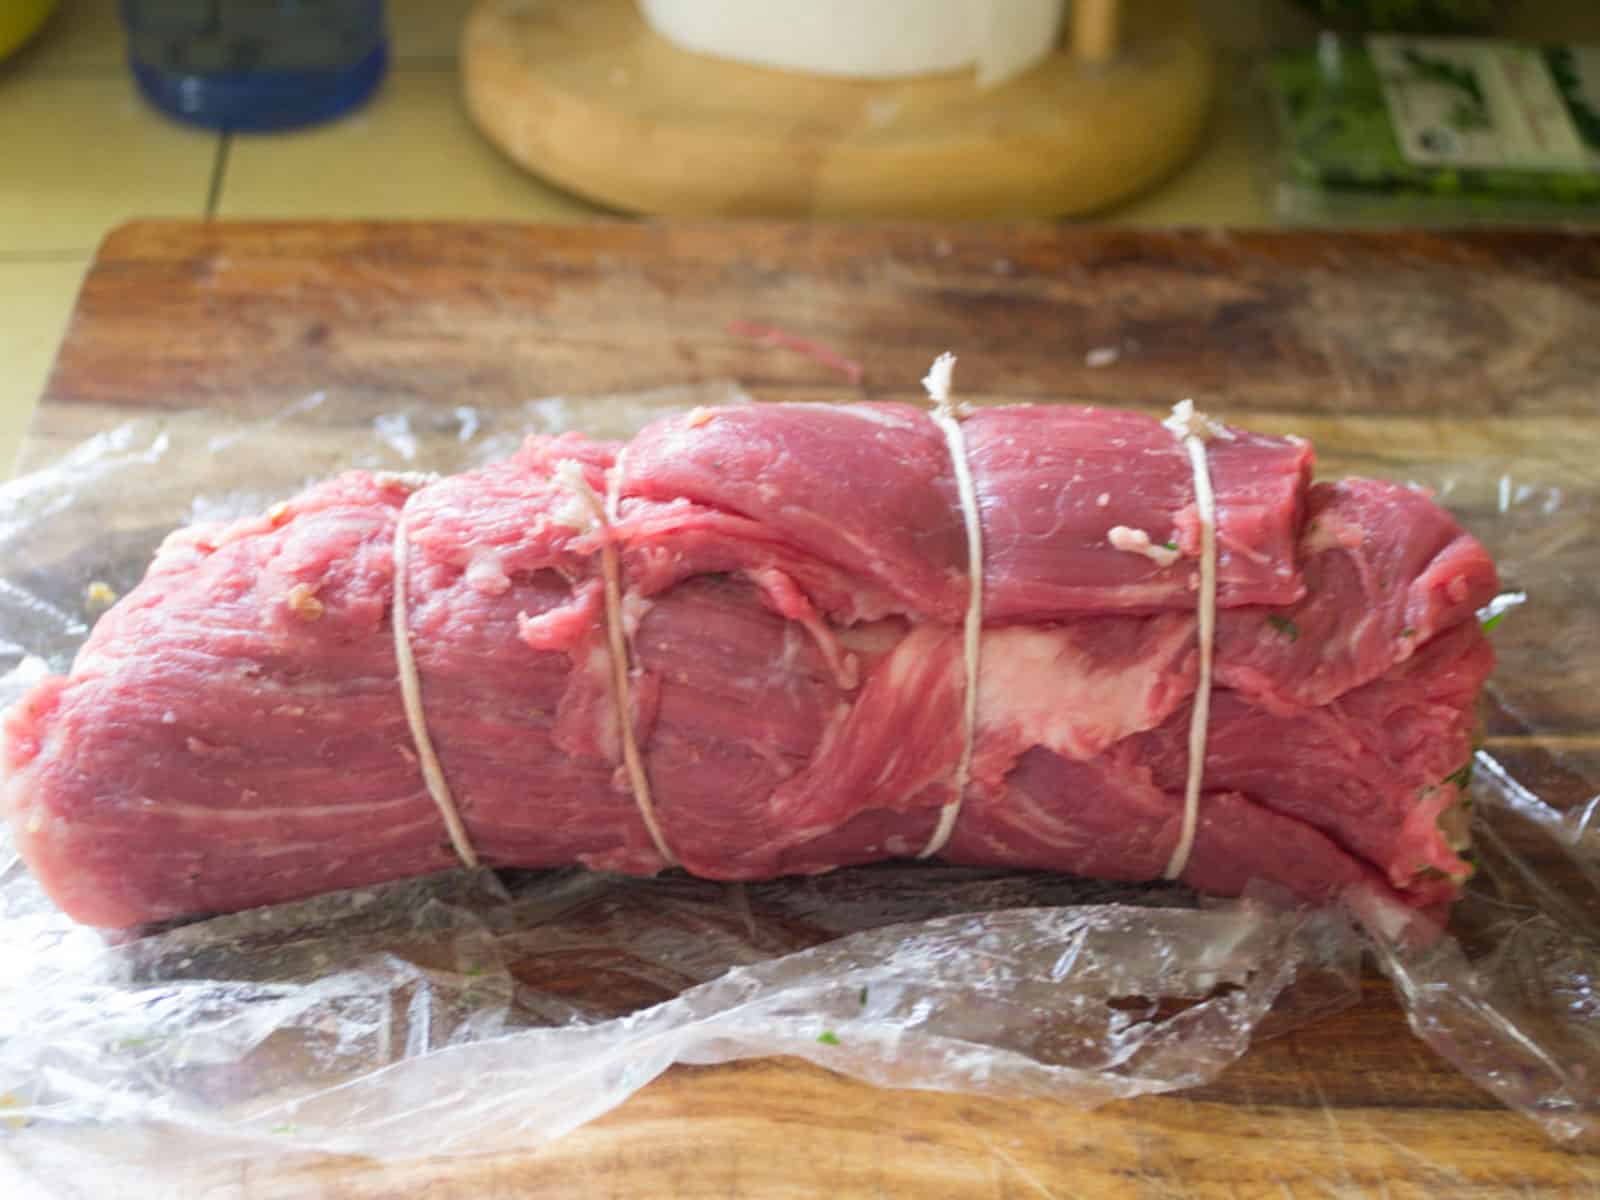 Roll the flank steak up, making sure the filling stays inside and use butcher string to tie up the braciole.